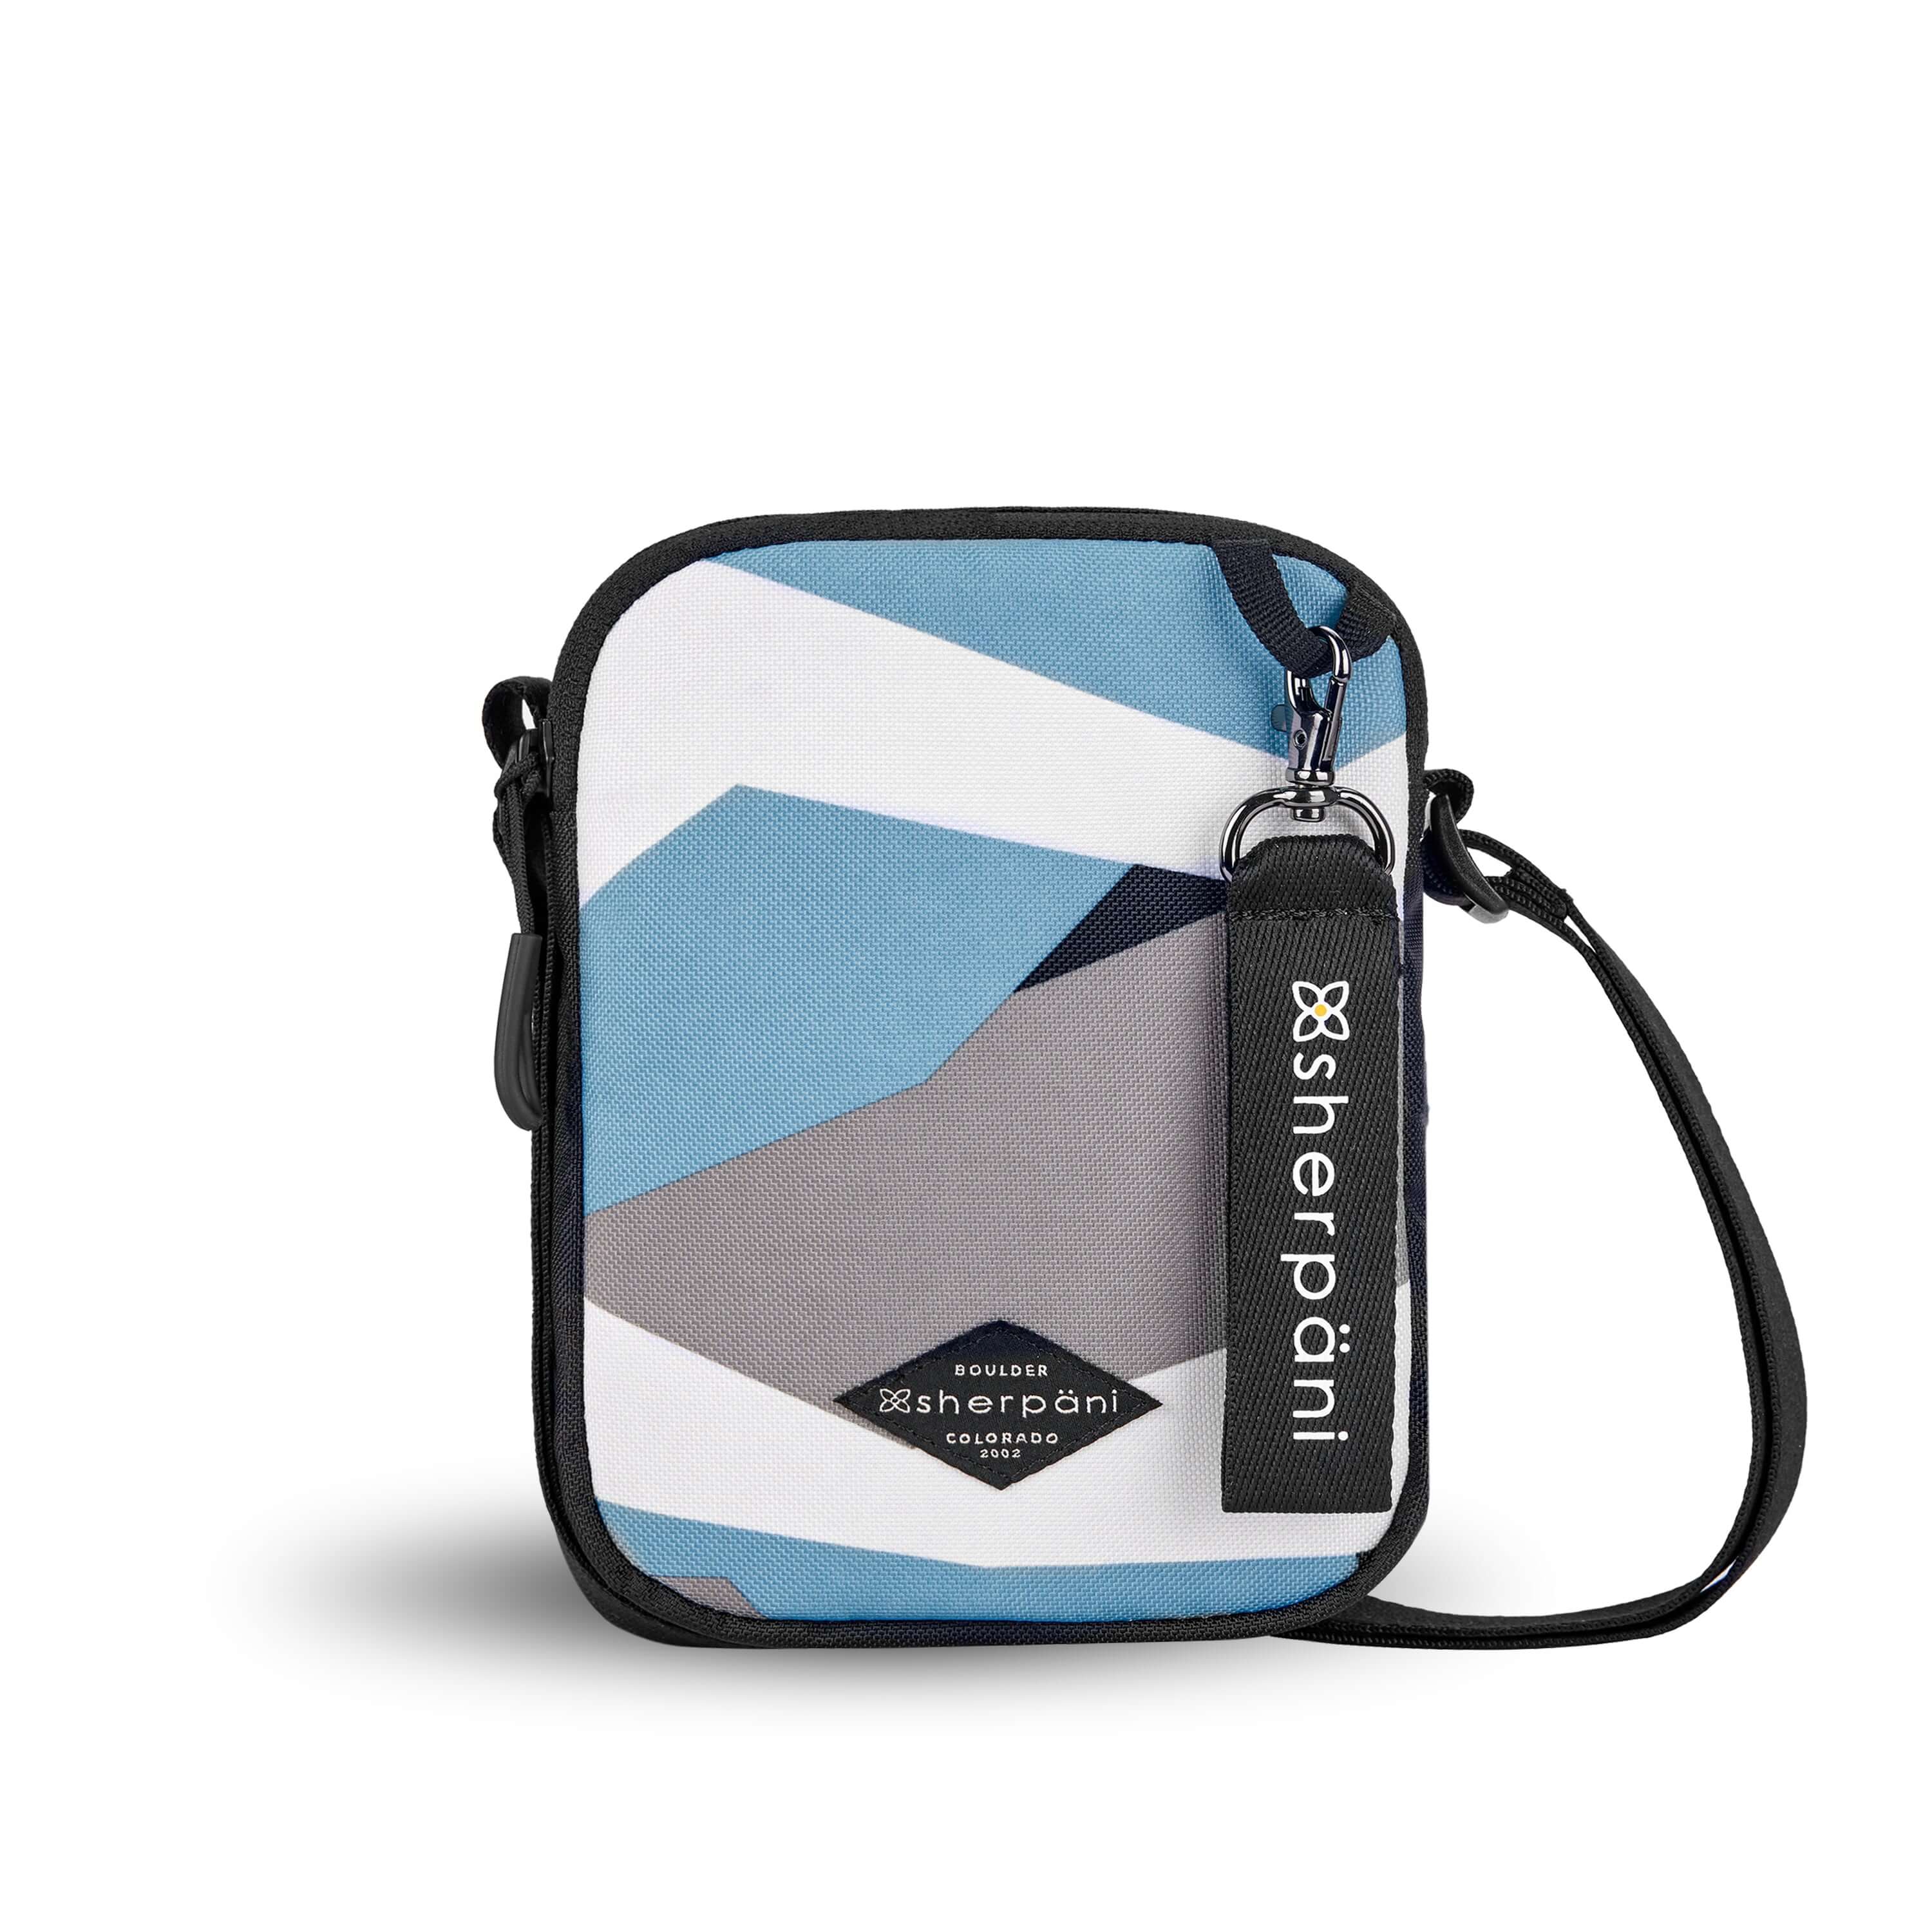 Flat front view of Sherpani crossbody, the Rogue in Summer Camo. The bag is two toned: the front is a camouflage pattern of light blue, gray and white, the back is black. The main zipper compartment features an easy-pull zipper accented in black. The bag has an adjustable crossbody strap. A branded Sherpani keychain is clipped to a fabric loop on the top right corner.